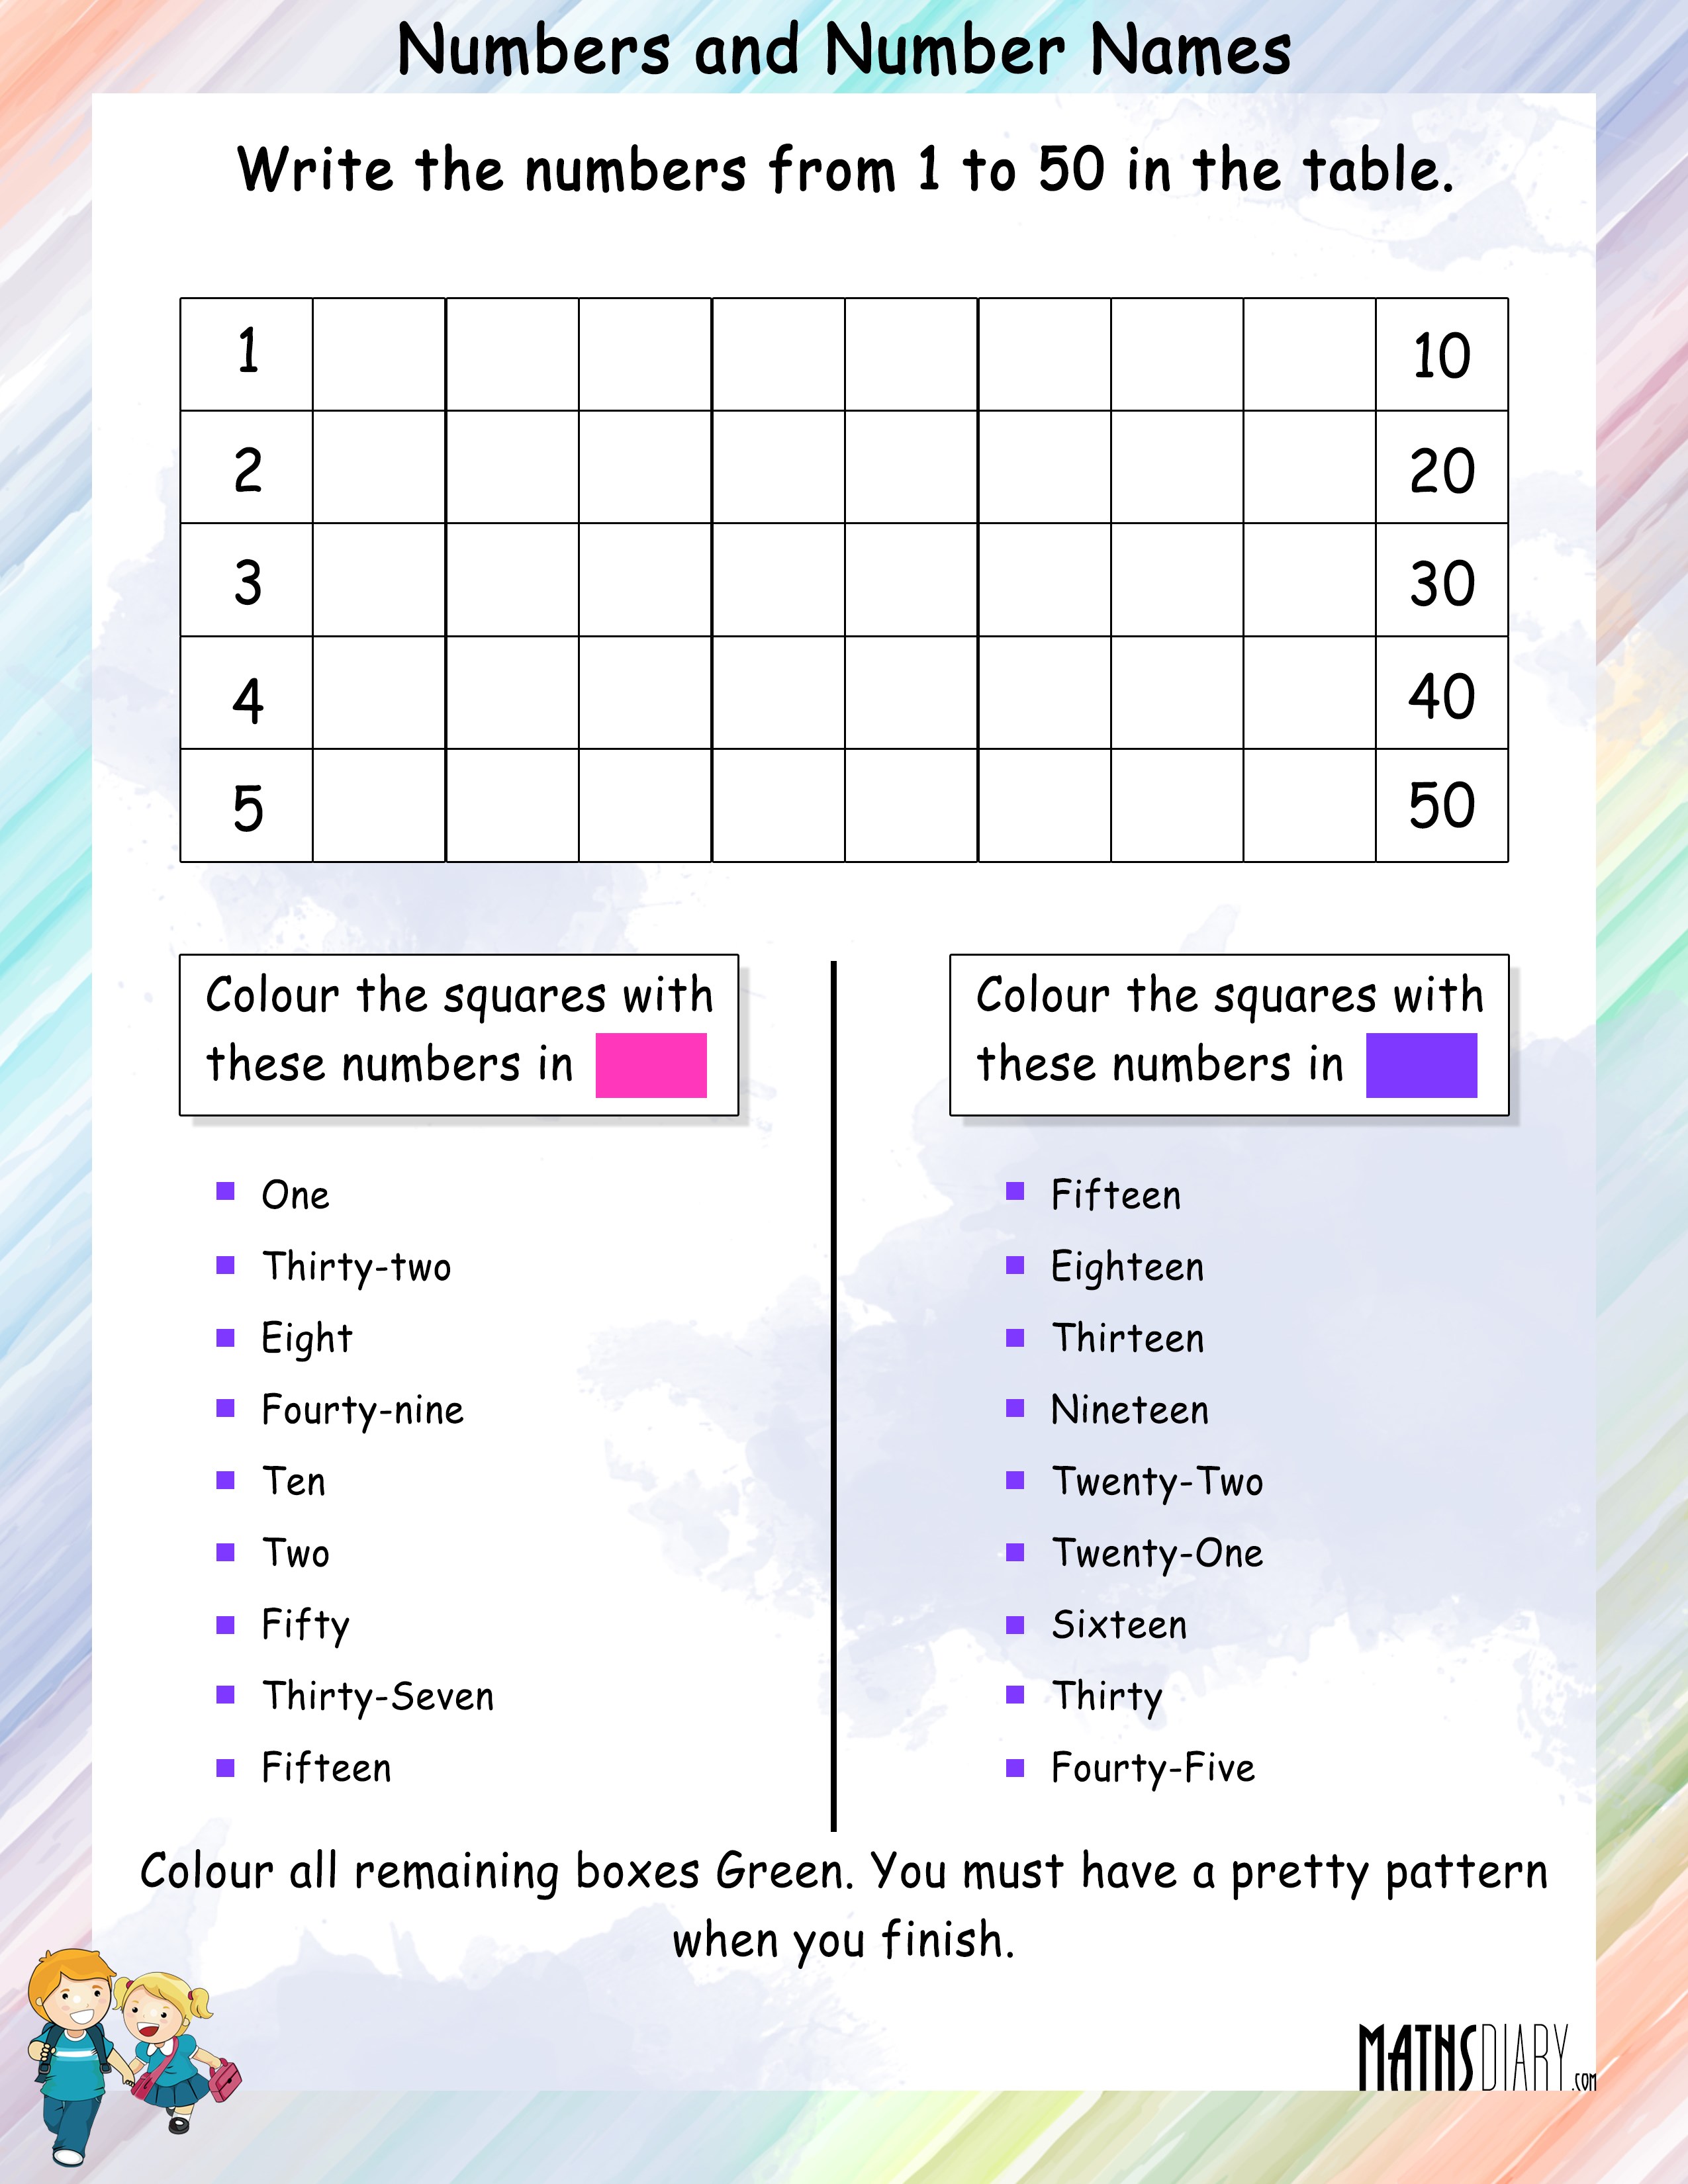 colouring puzzle of numbers and number names math worksheets mathsdiary com